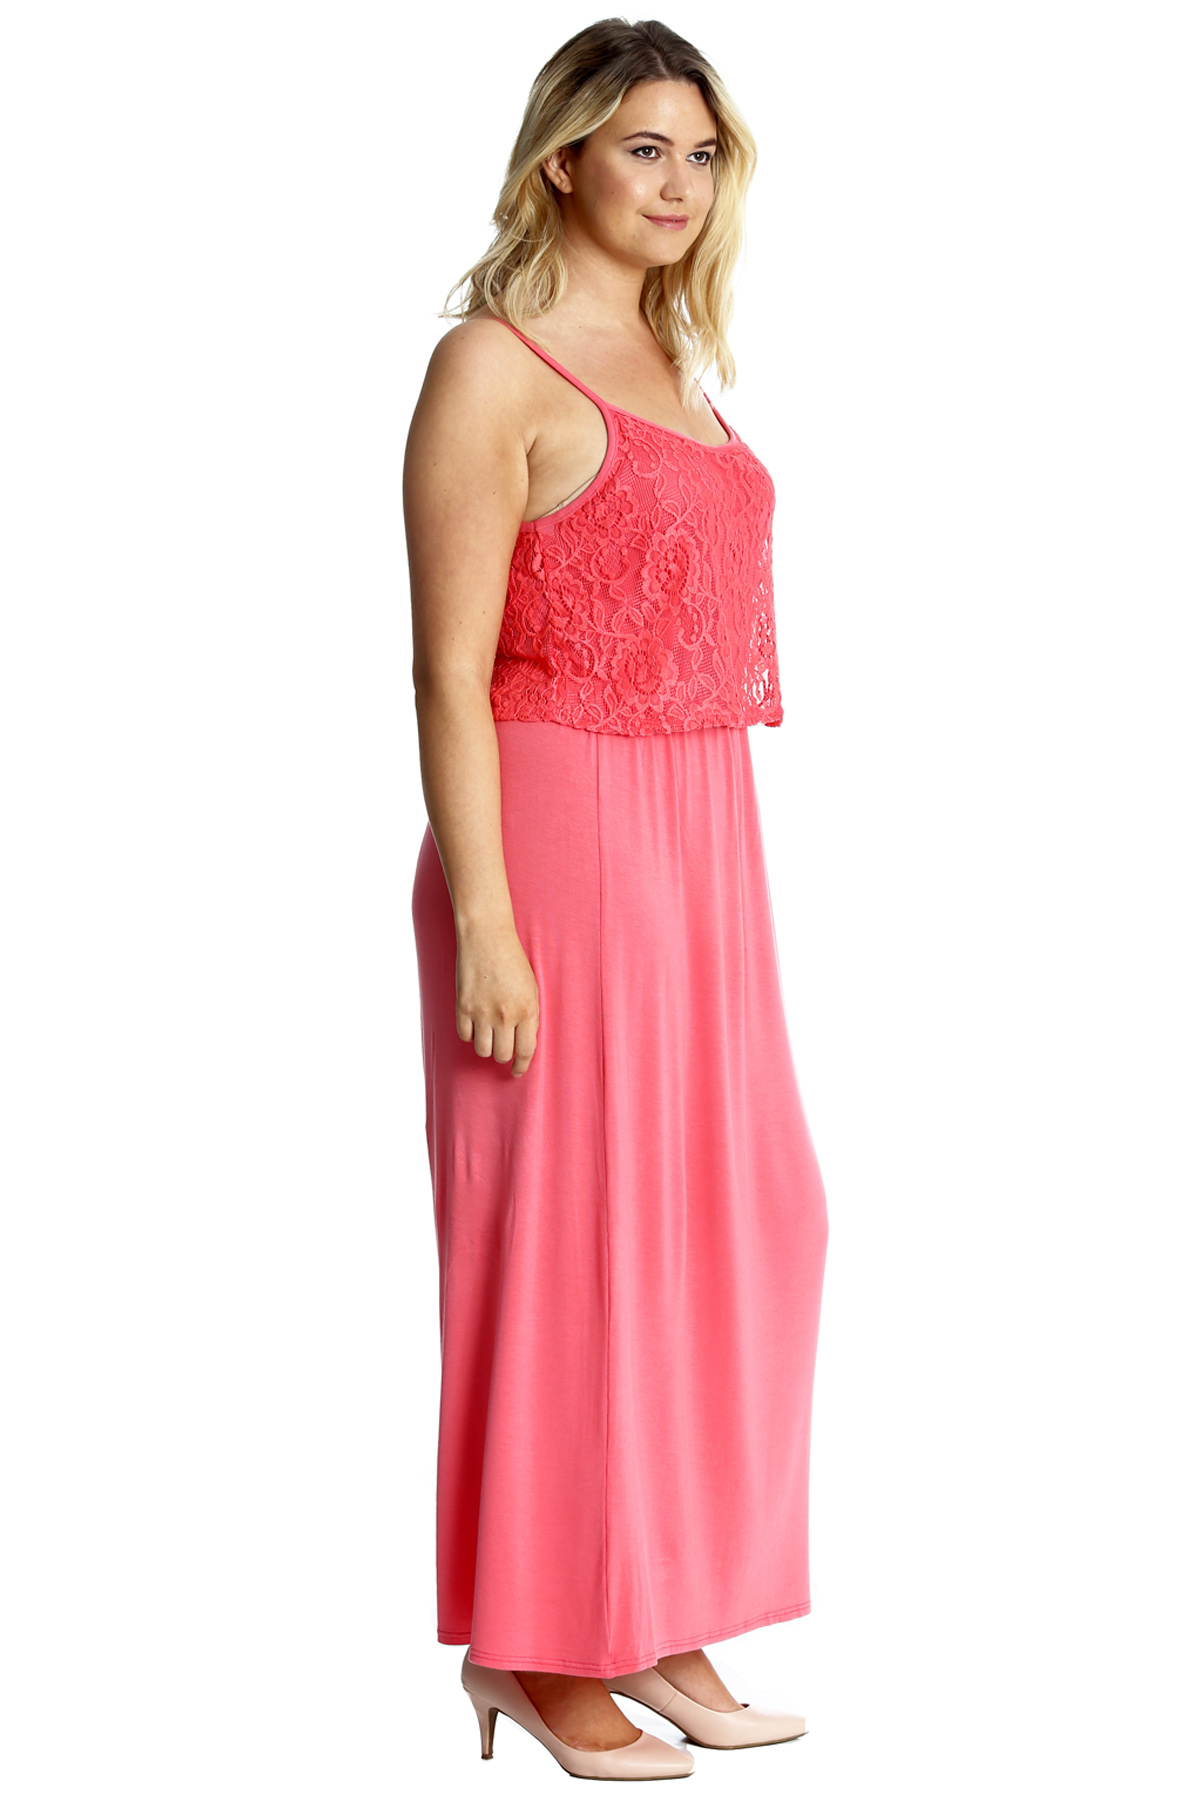 New Womens Maxi Dress Plus Size Ladies Floral Lace Full Length Sleeveless Summer Ebay